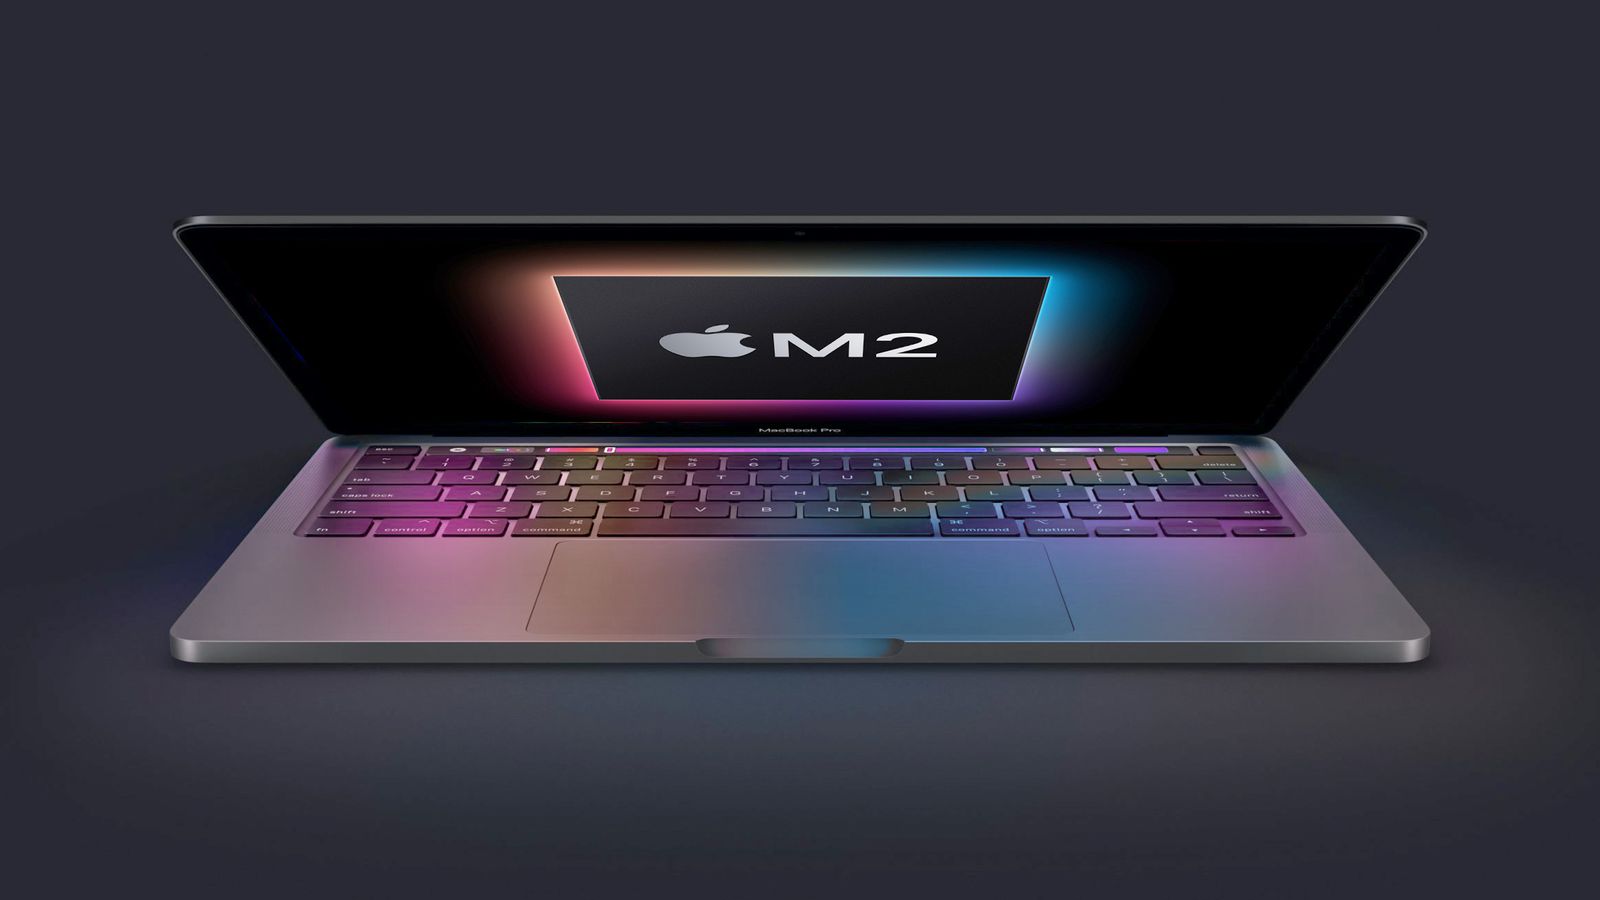 Leak: In March, Apple will introduce a 13-inch MacBook Pro with an M2 chip and the same design